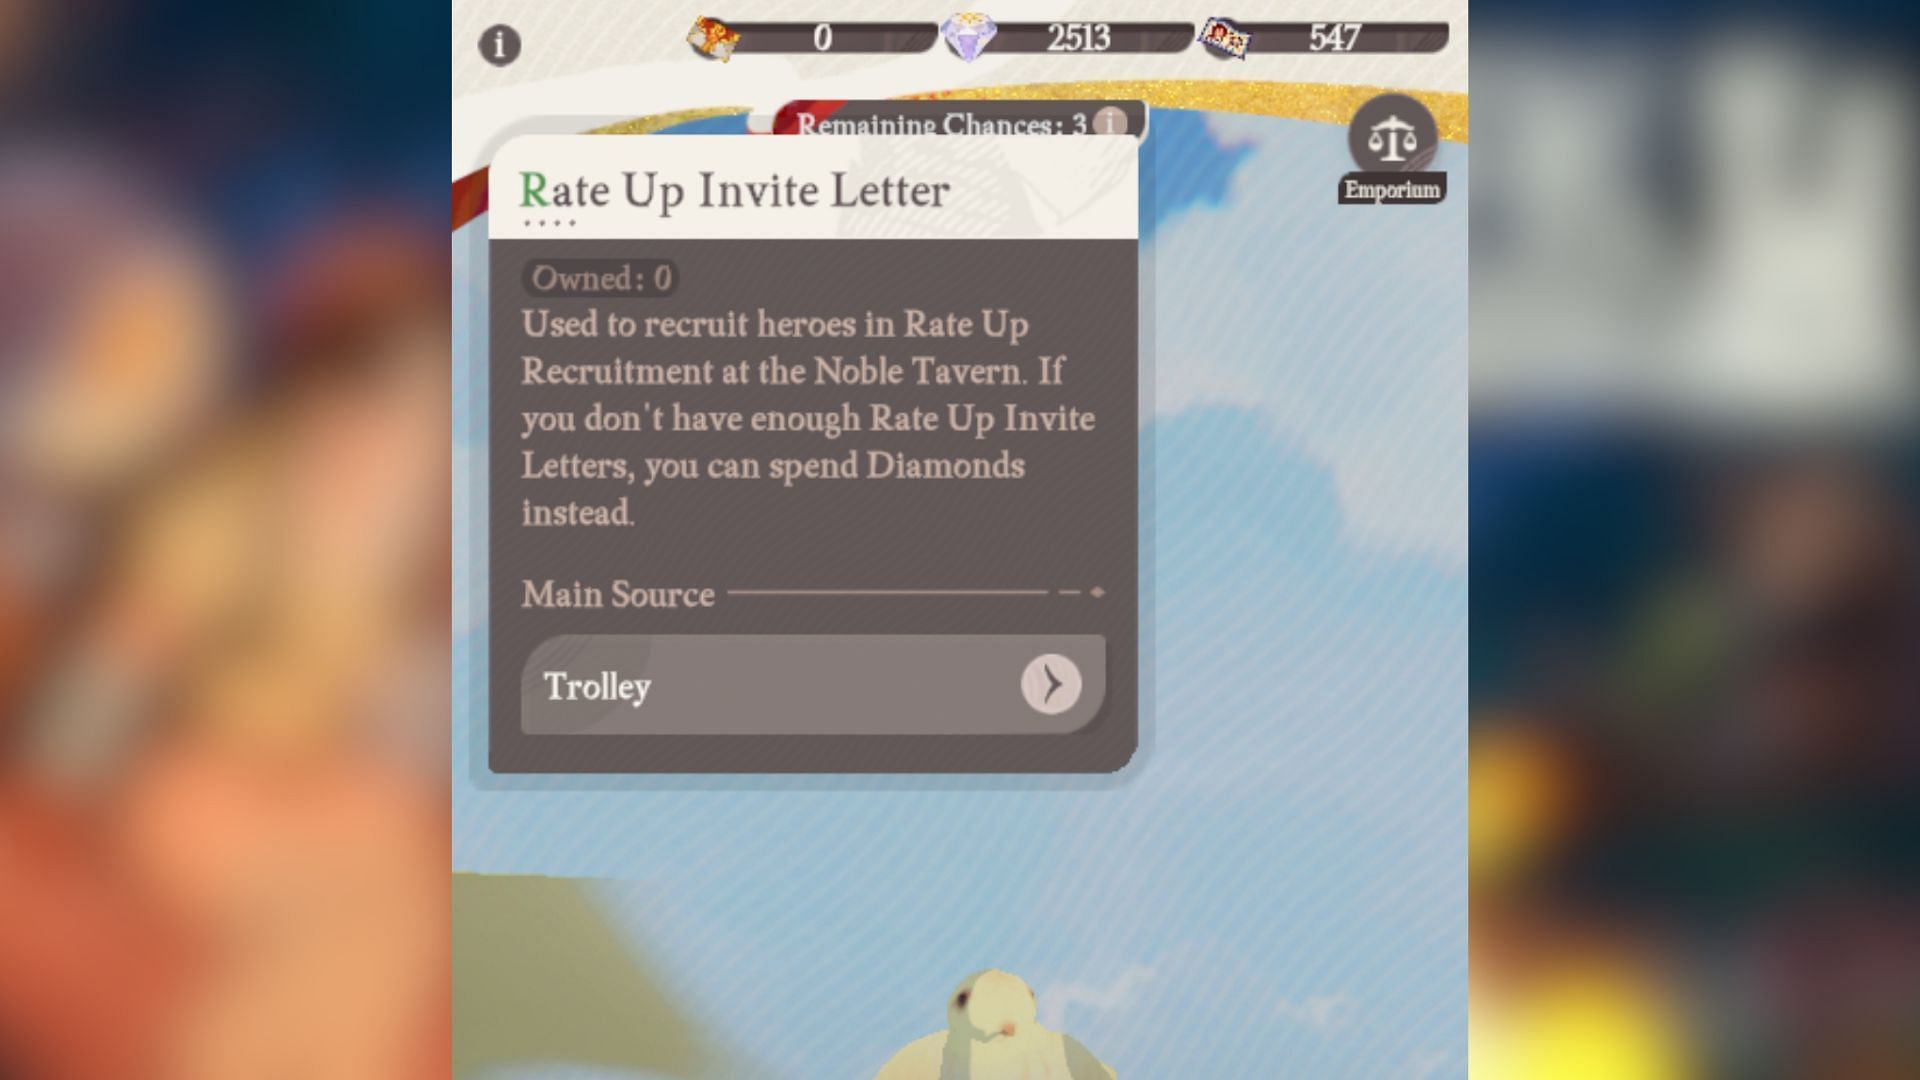 You can only exchange Diamonds for Rate Up Invite Letter. (Image via Farlight)